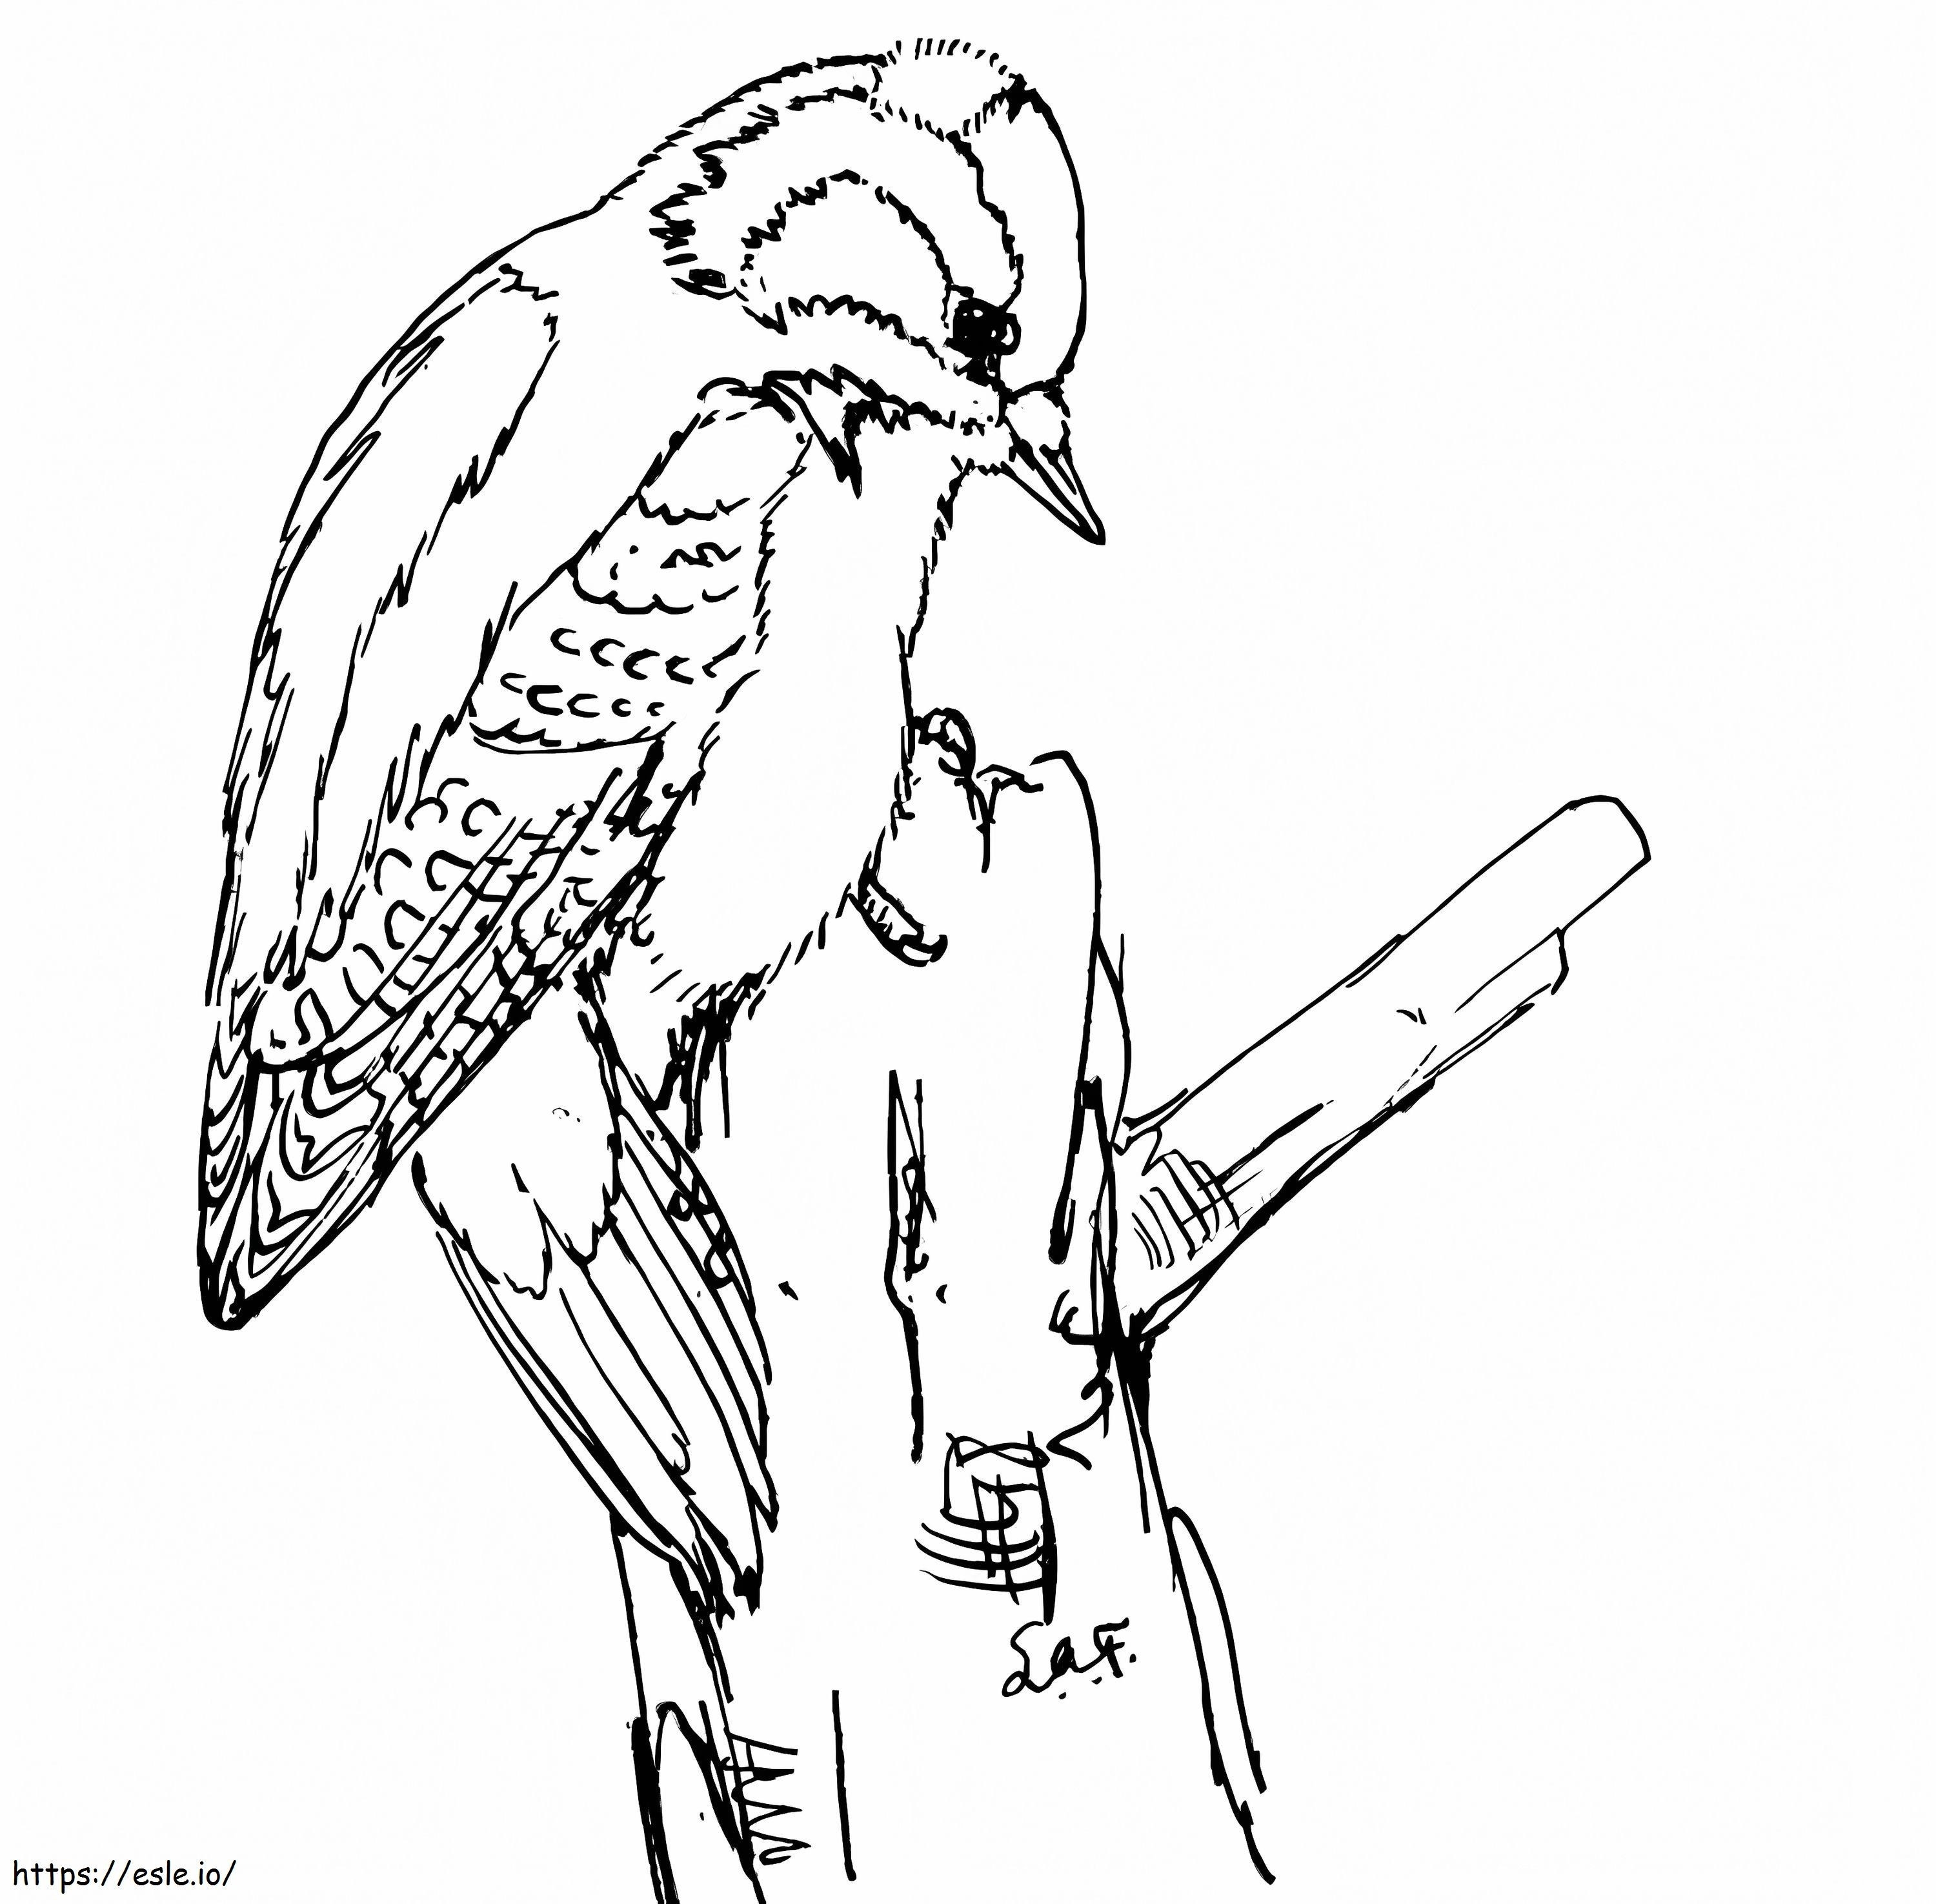 Downy Woodpecker coloring page